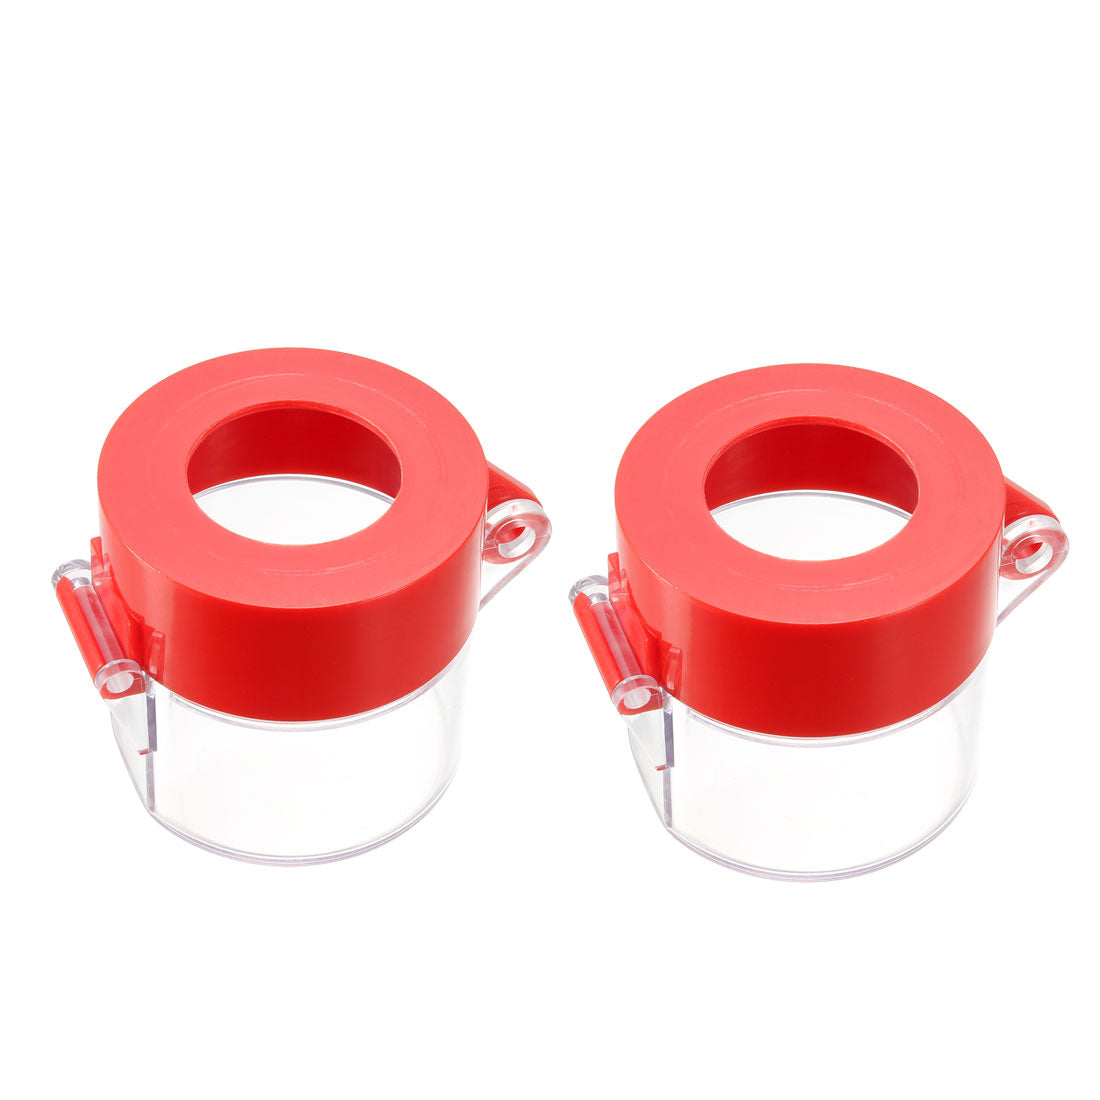 Uxcell Uxcell 2pcs Clear Plasatic Switch Cover Protector for 30mm Diameter Push Button Switch 55*55